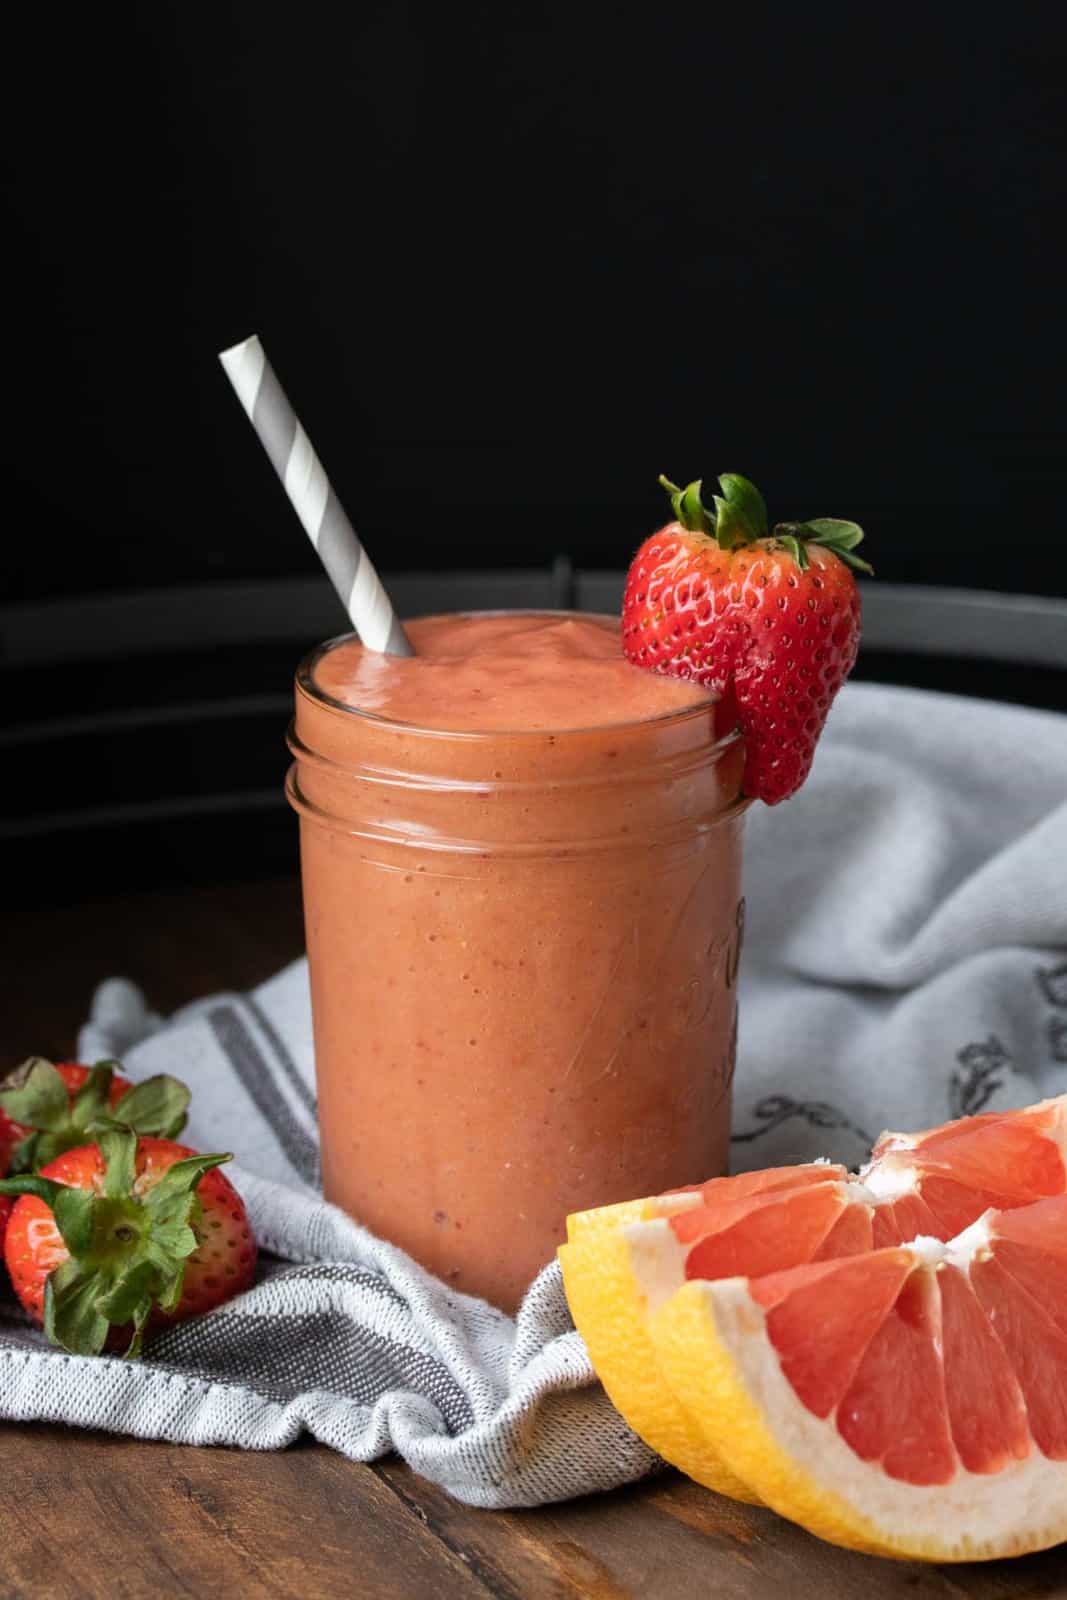 Glass jar with a salmon colored smoothie and a strawberry on the side